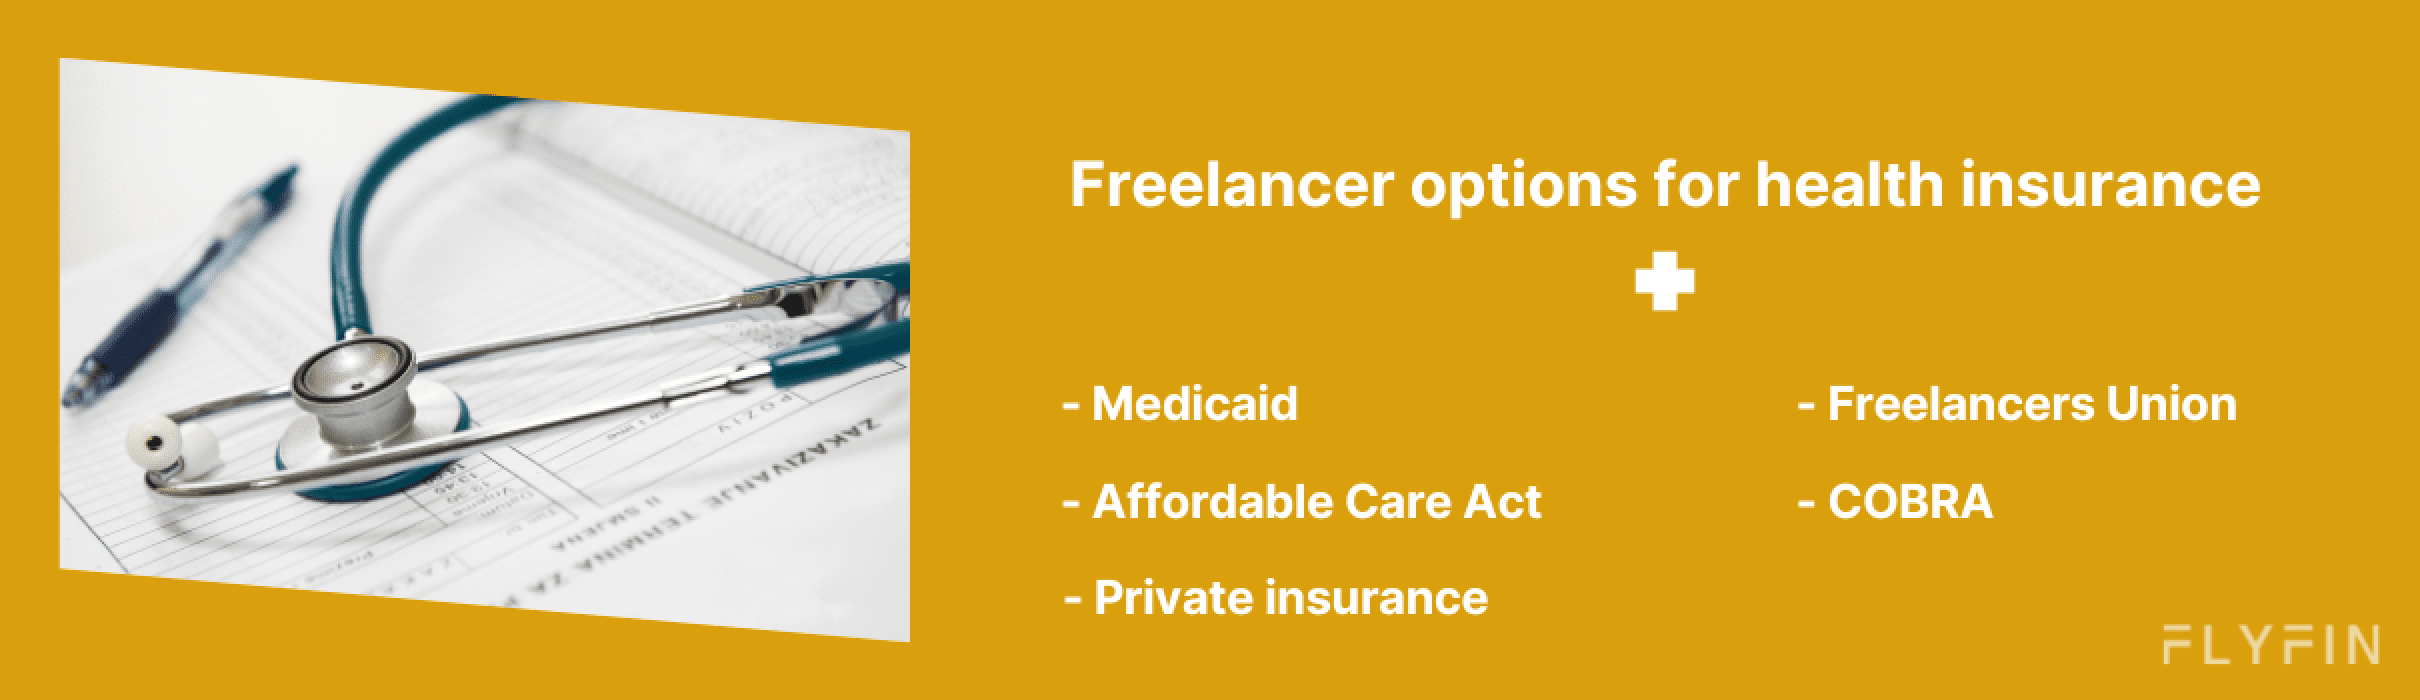 Image listing health insurance options for freelancers including Medicaid, Affordable Care Act, Private insurance, Freelancers Union, and COBRA.